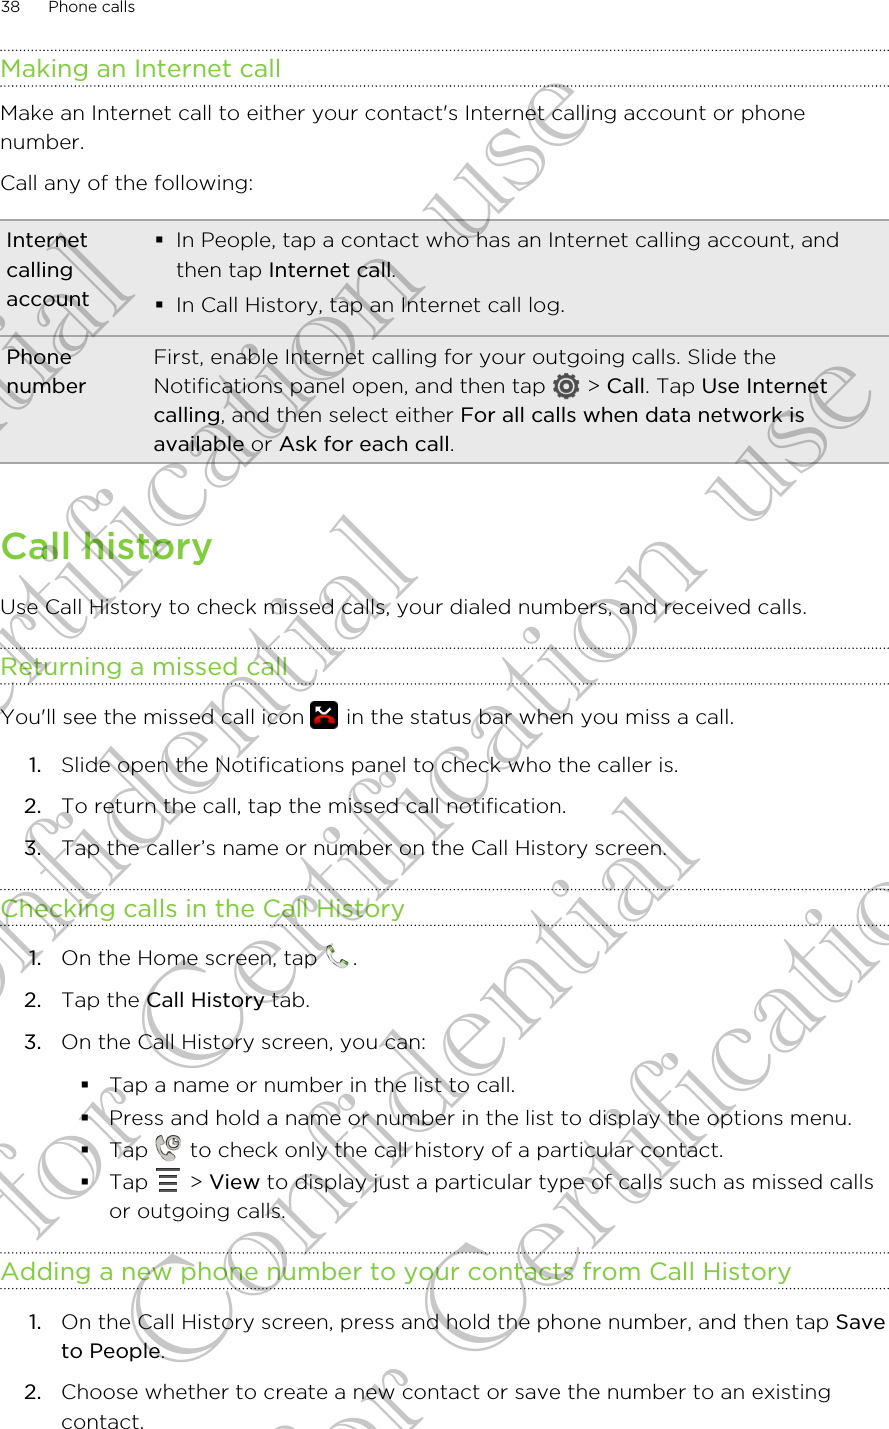 Making an Internet callMake an Internet call to either your contact&apos;s Internet calling account or phonenumber.Call any of the following:Internetcallingaccount§In People, tap a contact who has an Internet calling account, andthen tap Internet call.§In Call History, tap an Internet call log.PhonenumberFirst, enable Internet calling for your outgoing calls. Slide theNotifications panel open, and then tap   &gt; Call. Tap Use Internetcalling, and then select either For all calls when data network isavailable or Ask for each call.Call historyUse Call History to check missed calls, your dialed numbers, and received calls.Returning a missed callYou&apos;ll see the missed call icon   in the status bar when you miss a call.1. Slide open the Notifications panel to check who the caller is.2. To return the call, tap the missed call notification.3. Tap the caller’s name or number on the Call History screen.Checking calls in the Call History1. On the Home screen, tap  .2. Tap the Call History tab.3. On the Call History screen, you can:§Tap a name or number in the list to call.§Press and hold a name or number in the list to display the options menu.§Tap   to check only the call history of a particular contact.§Tap   &gt; View to display just a particular type of calls such as missed callsor outgoing calls.Adding a new phone number to your contacts from Call History1. On the Call History screen, press and hold the phone number, and then tap Saveto People.2. Choose whether to create a new contact or save the number to an existingcontact.38 Phone callsConfidential for Certification use Confidential for Certification use Confidential for Certification use 